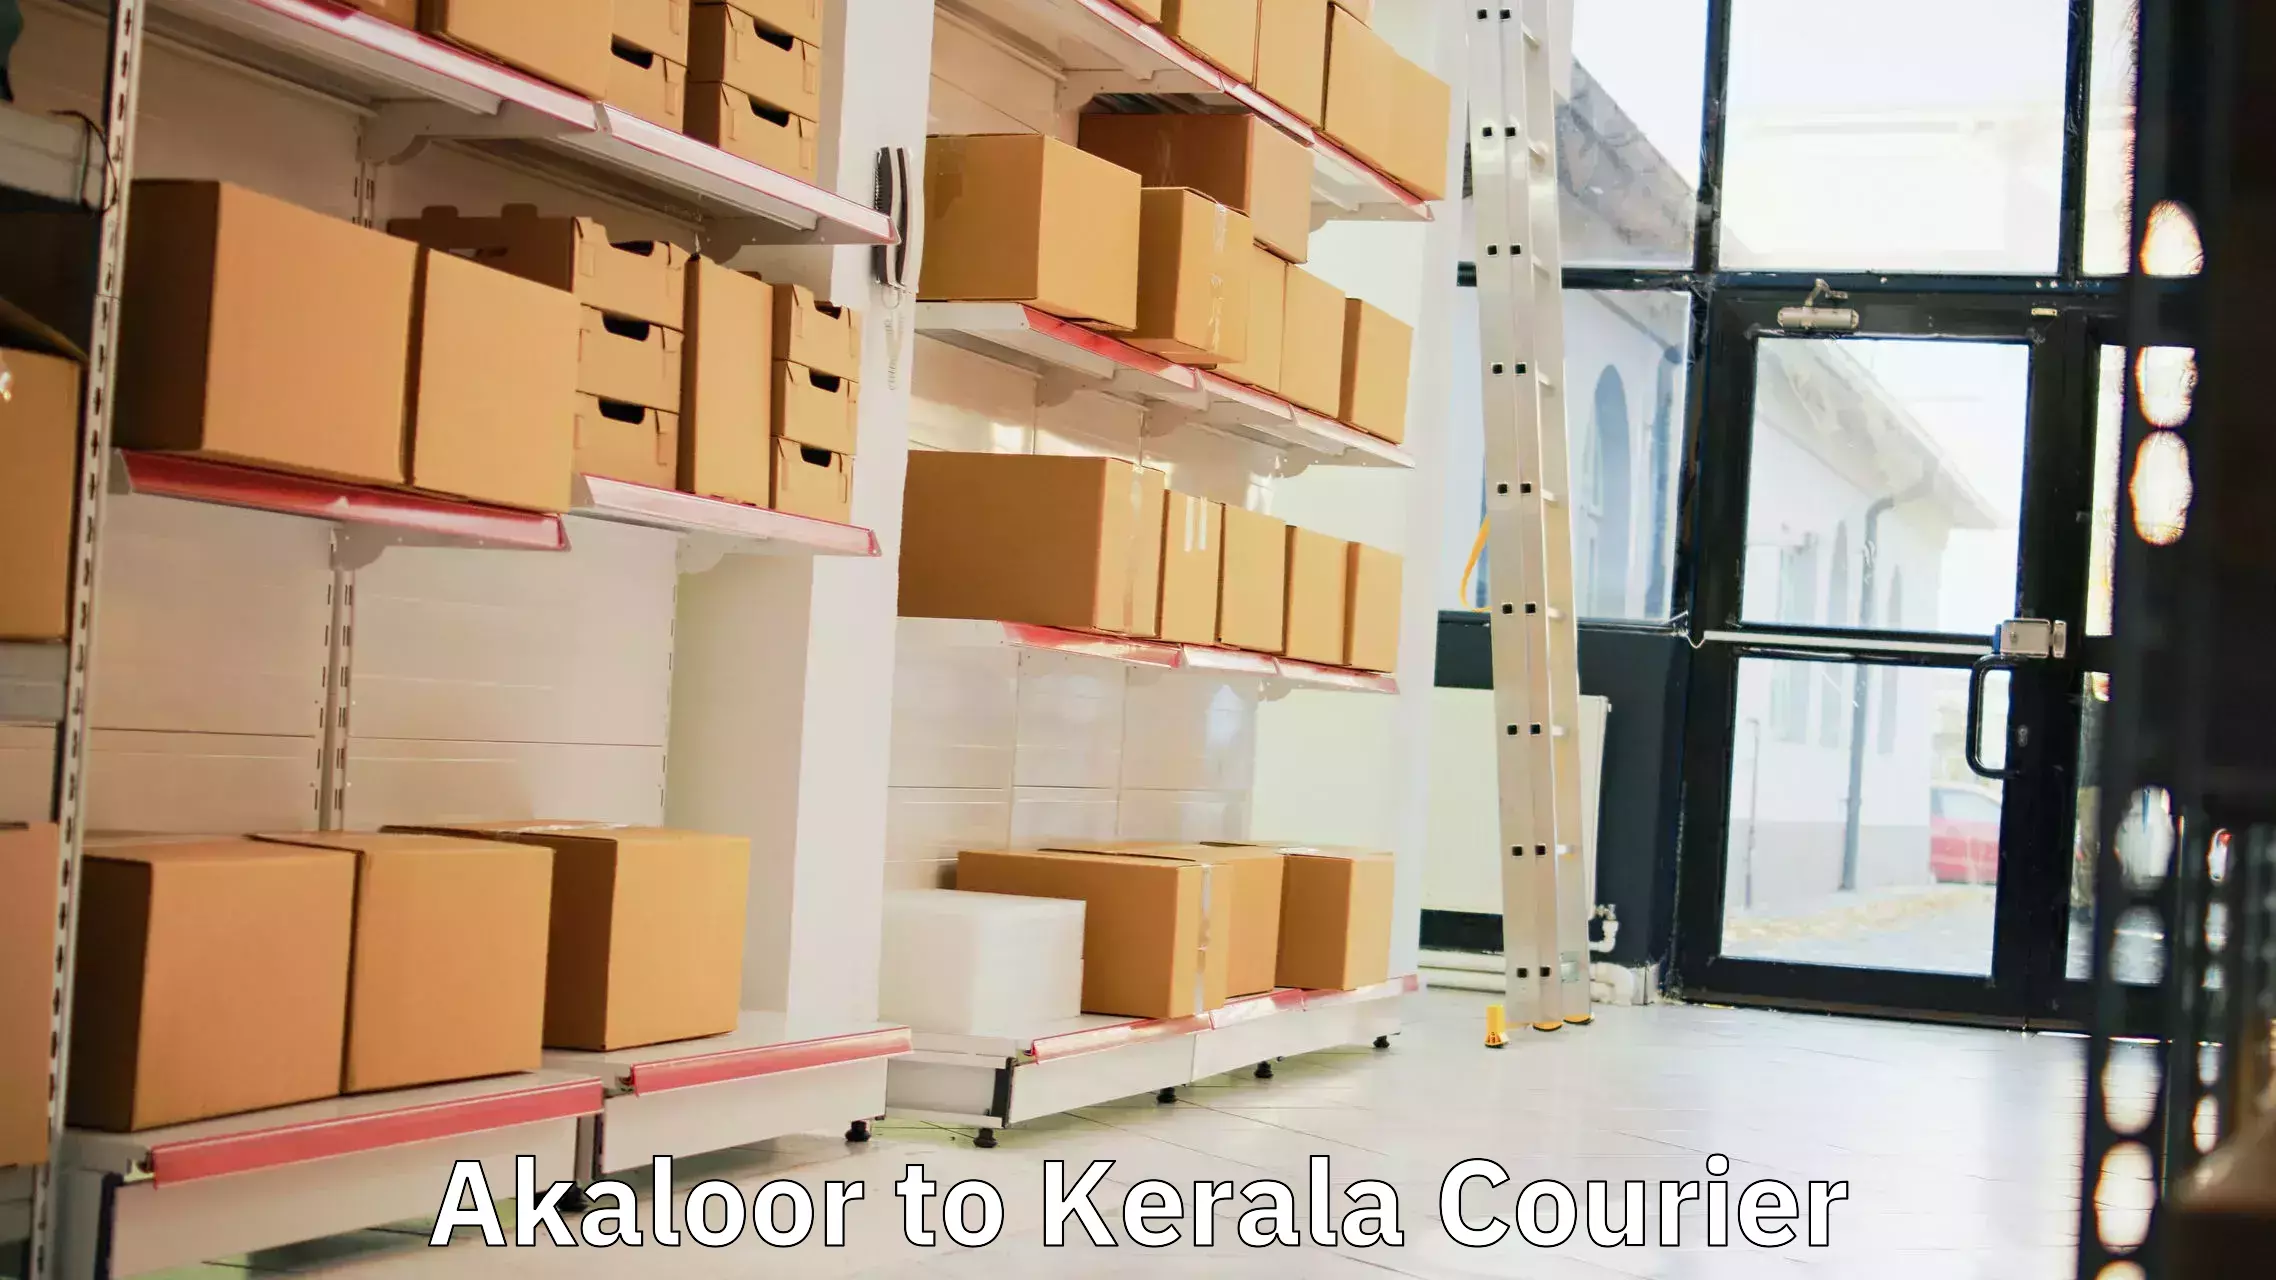 International courier networks Akaloor to Parappa